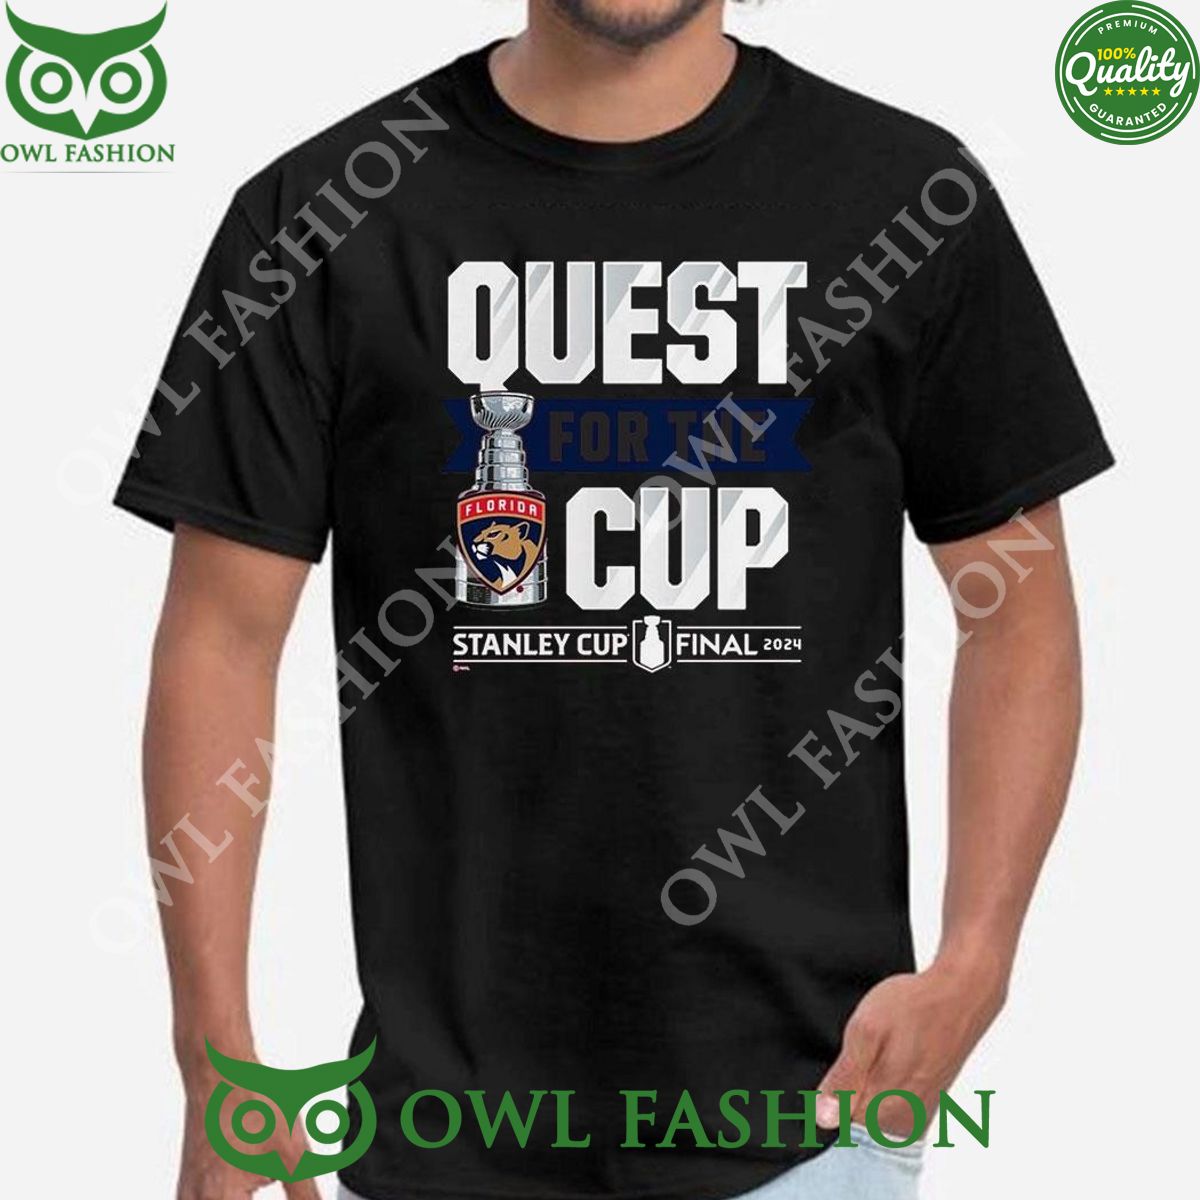 2024 stanley cup final quest florida panthers t shirt 1 34G9v.jpg